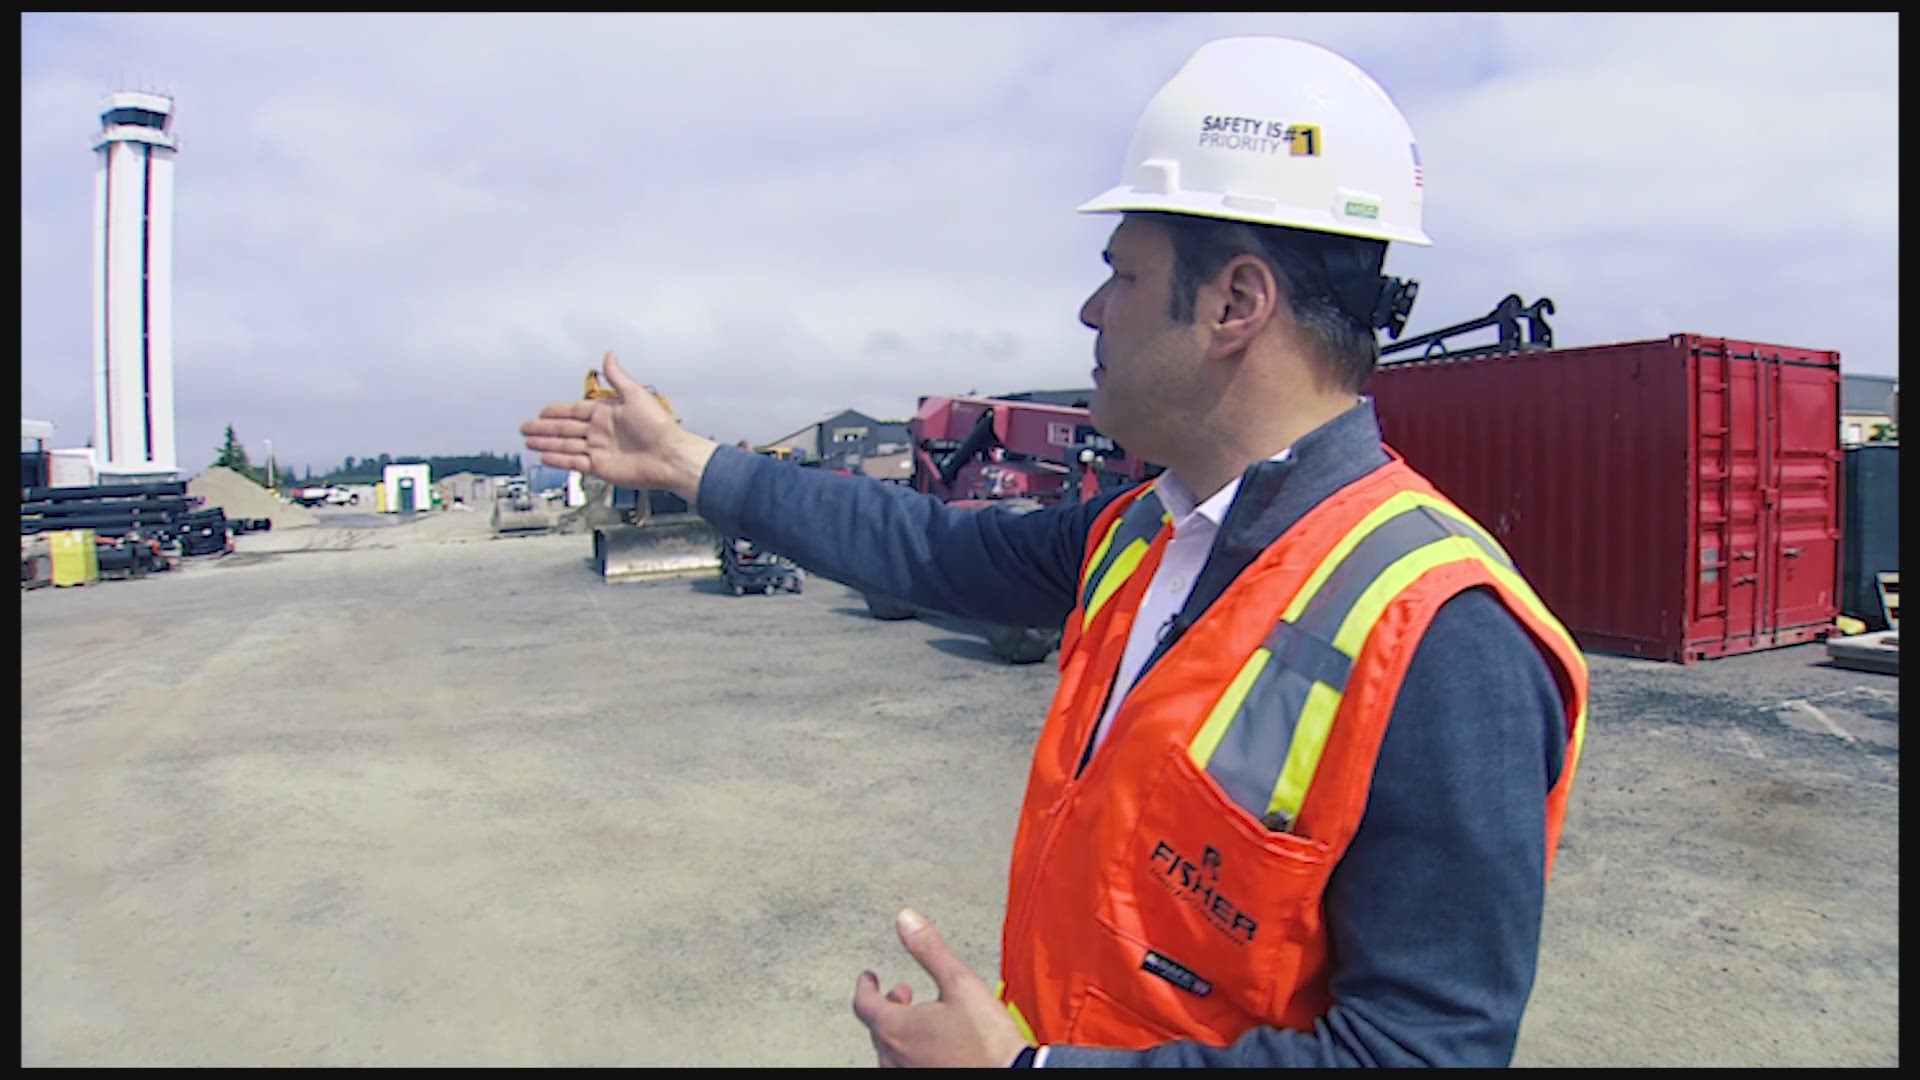 KING 5's Jake Whittenberg got a tour of the site as well as details on what to expect upon completion.